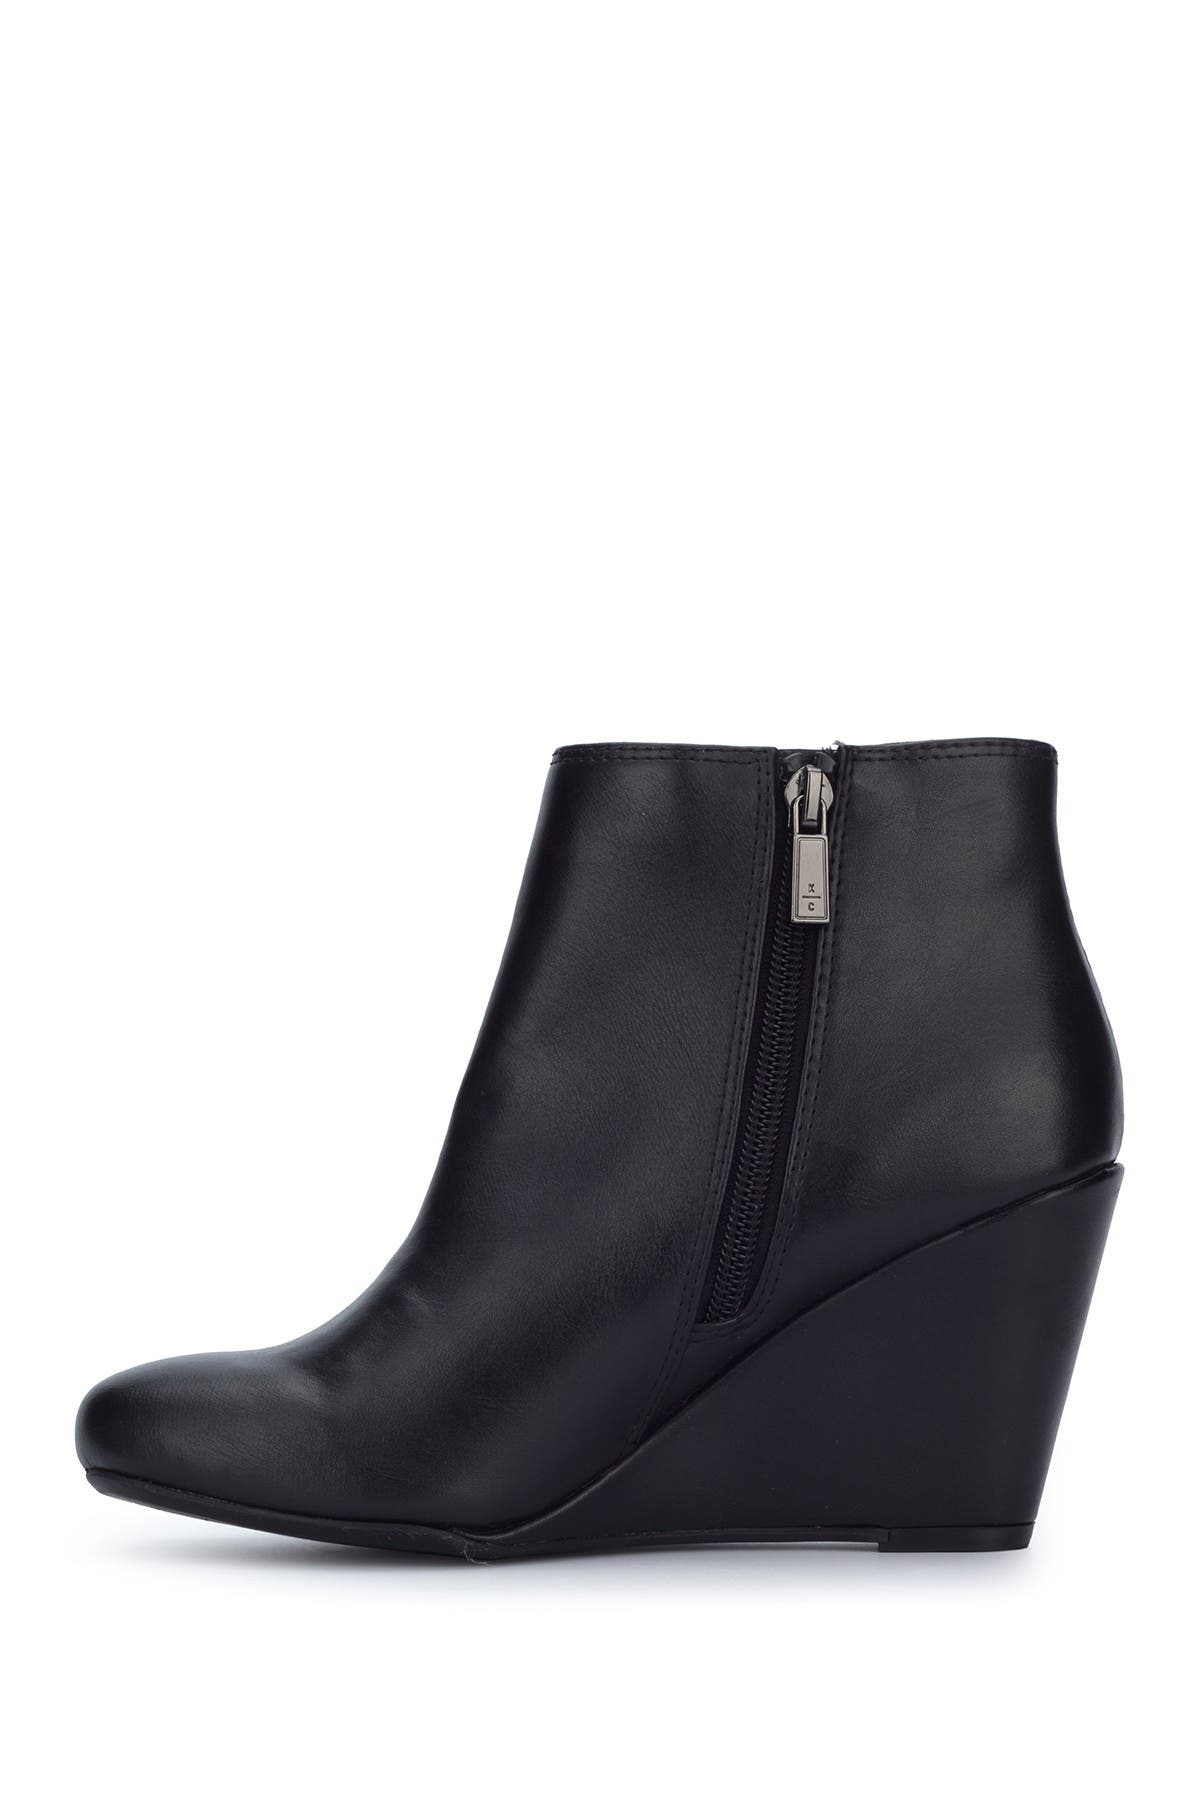 Kenneth Cole Reaction | Marcy Wedge Bootie | Nordstrom Rack